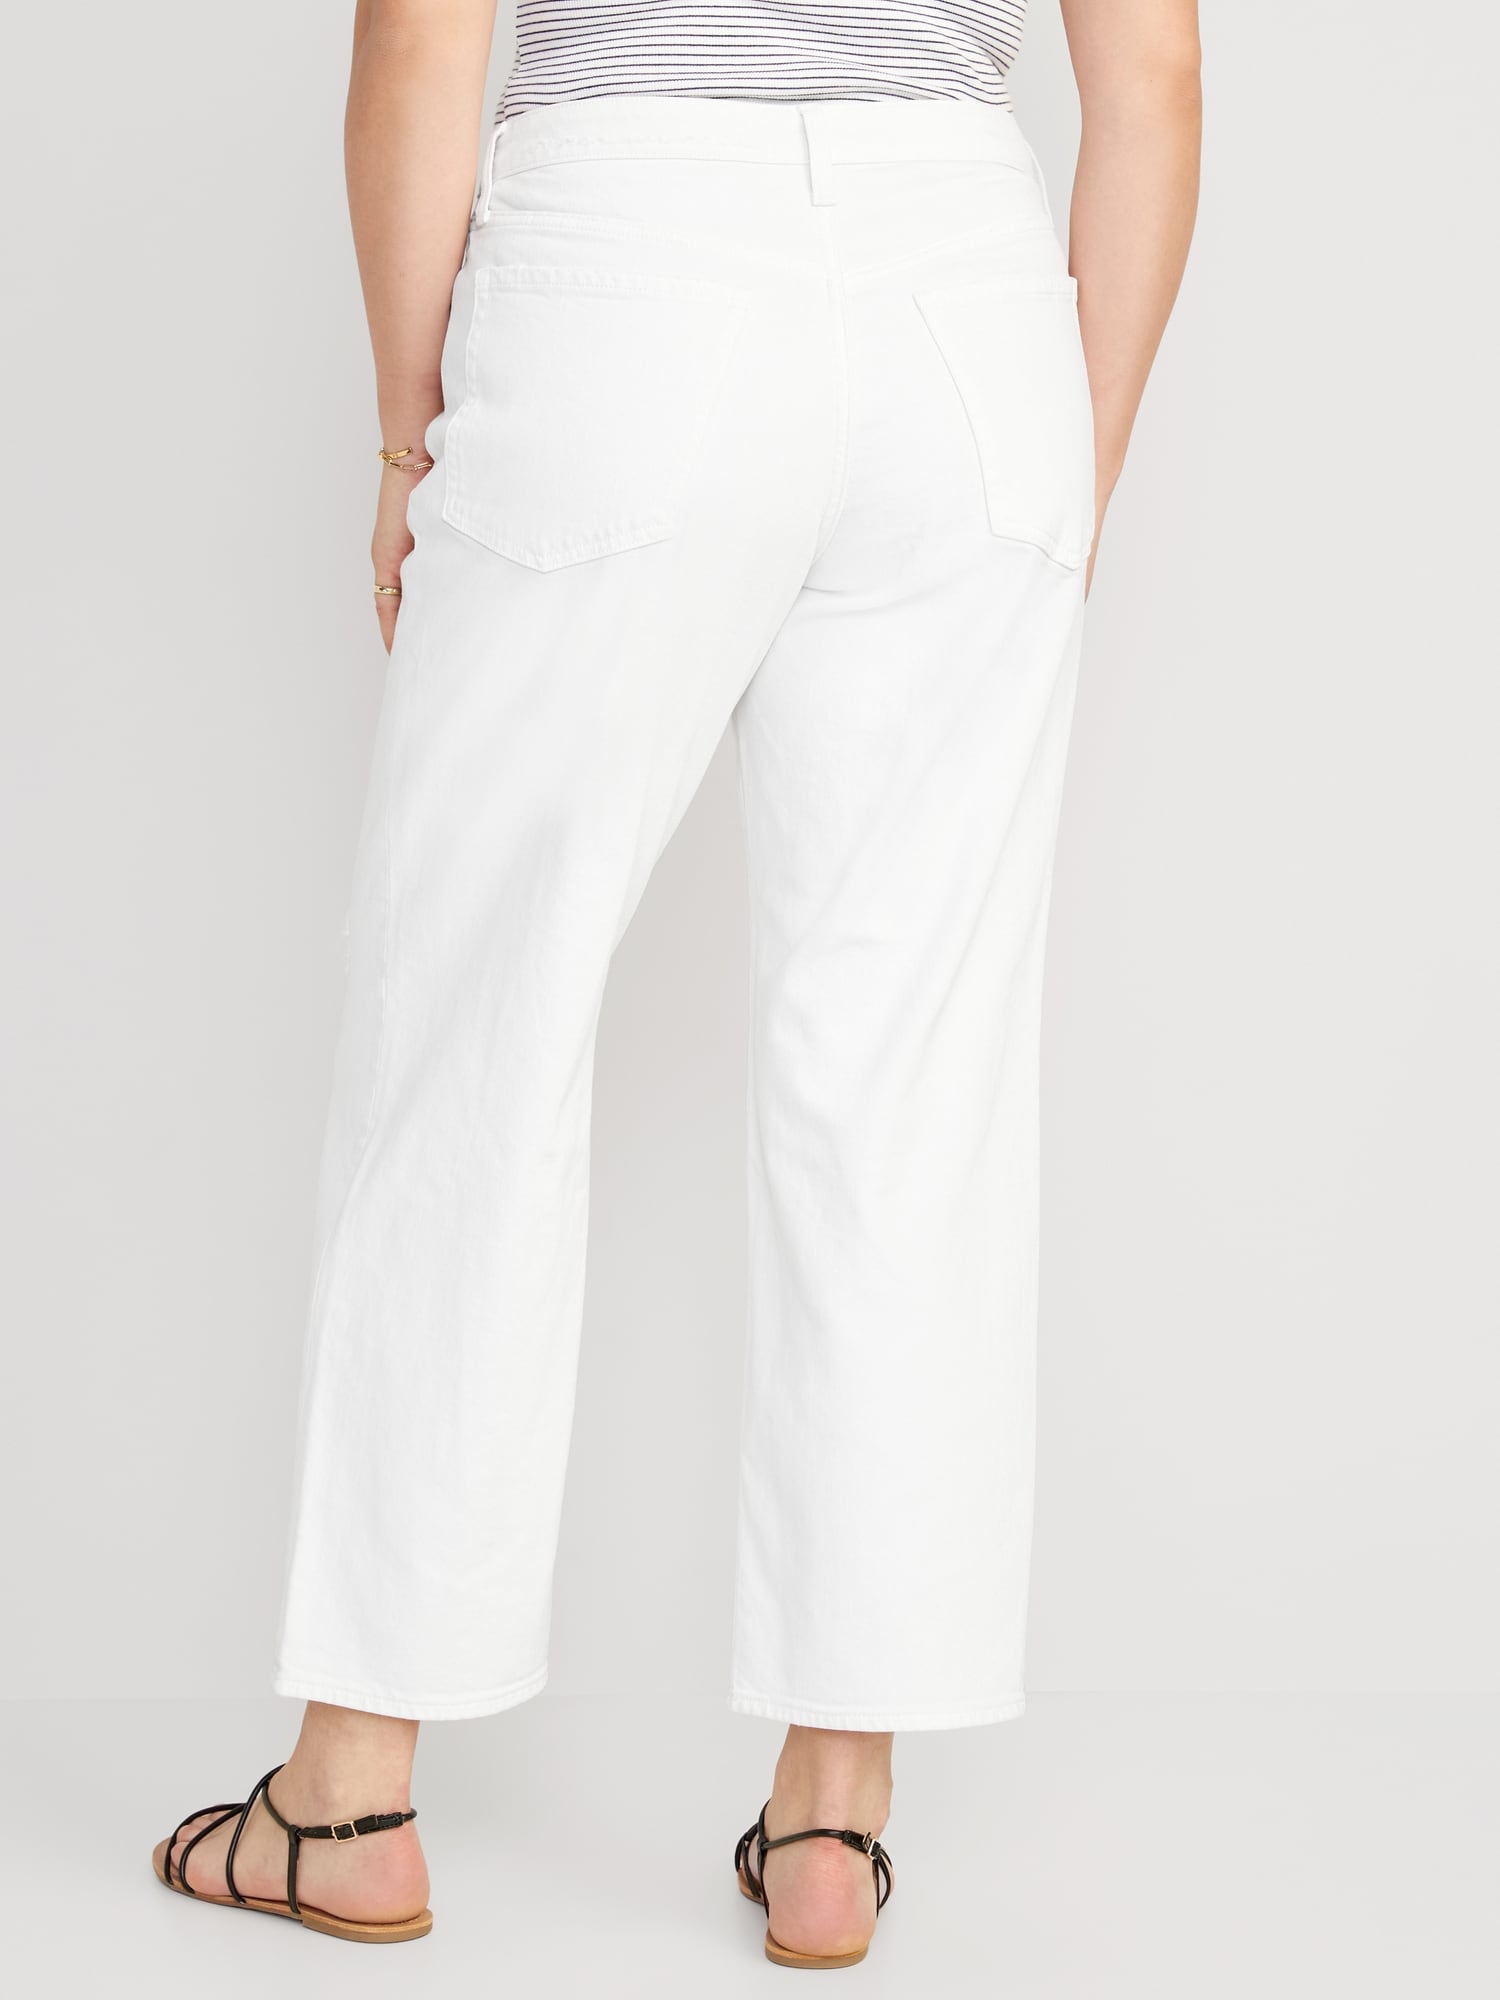 High-Waisted OG Loose Ripped White Jeans for Women | Old Navy